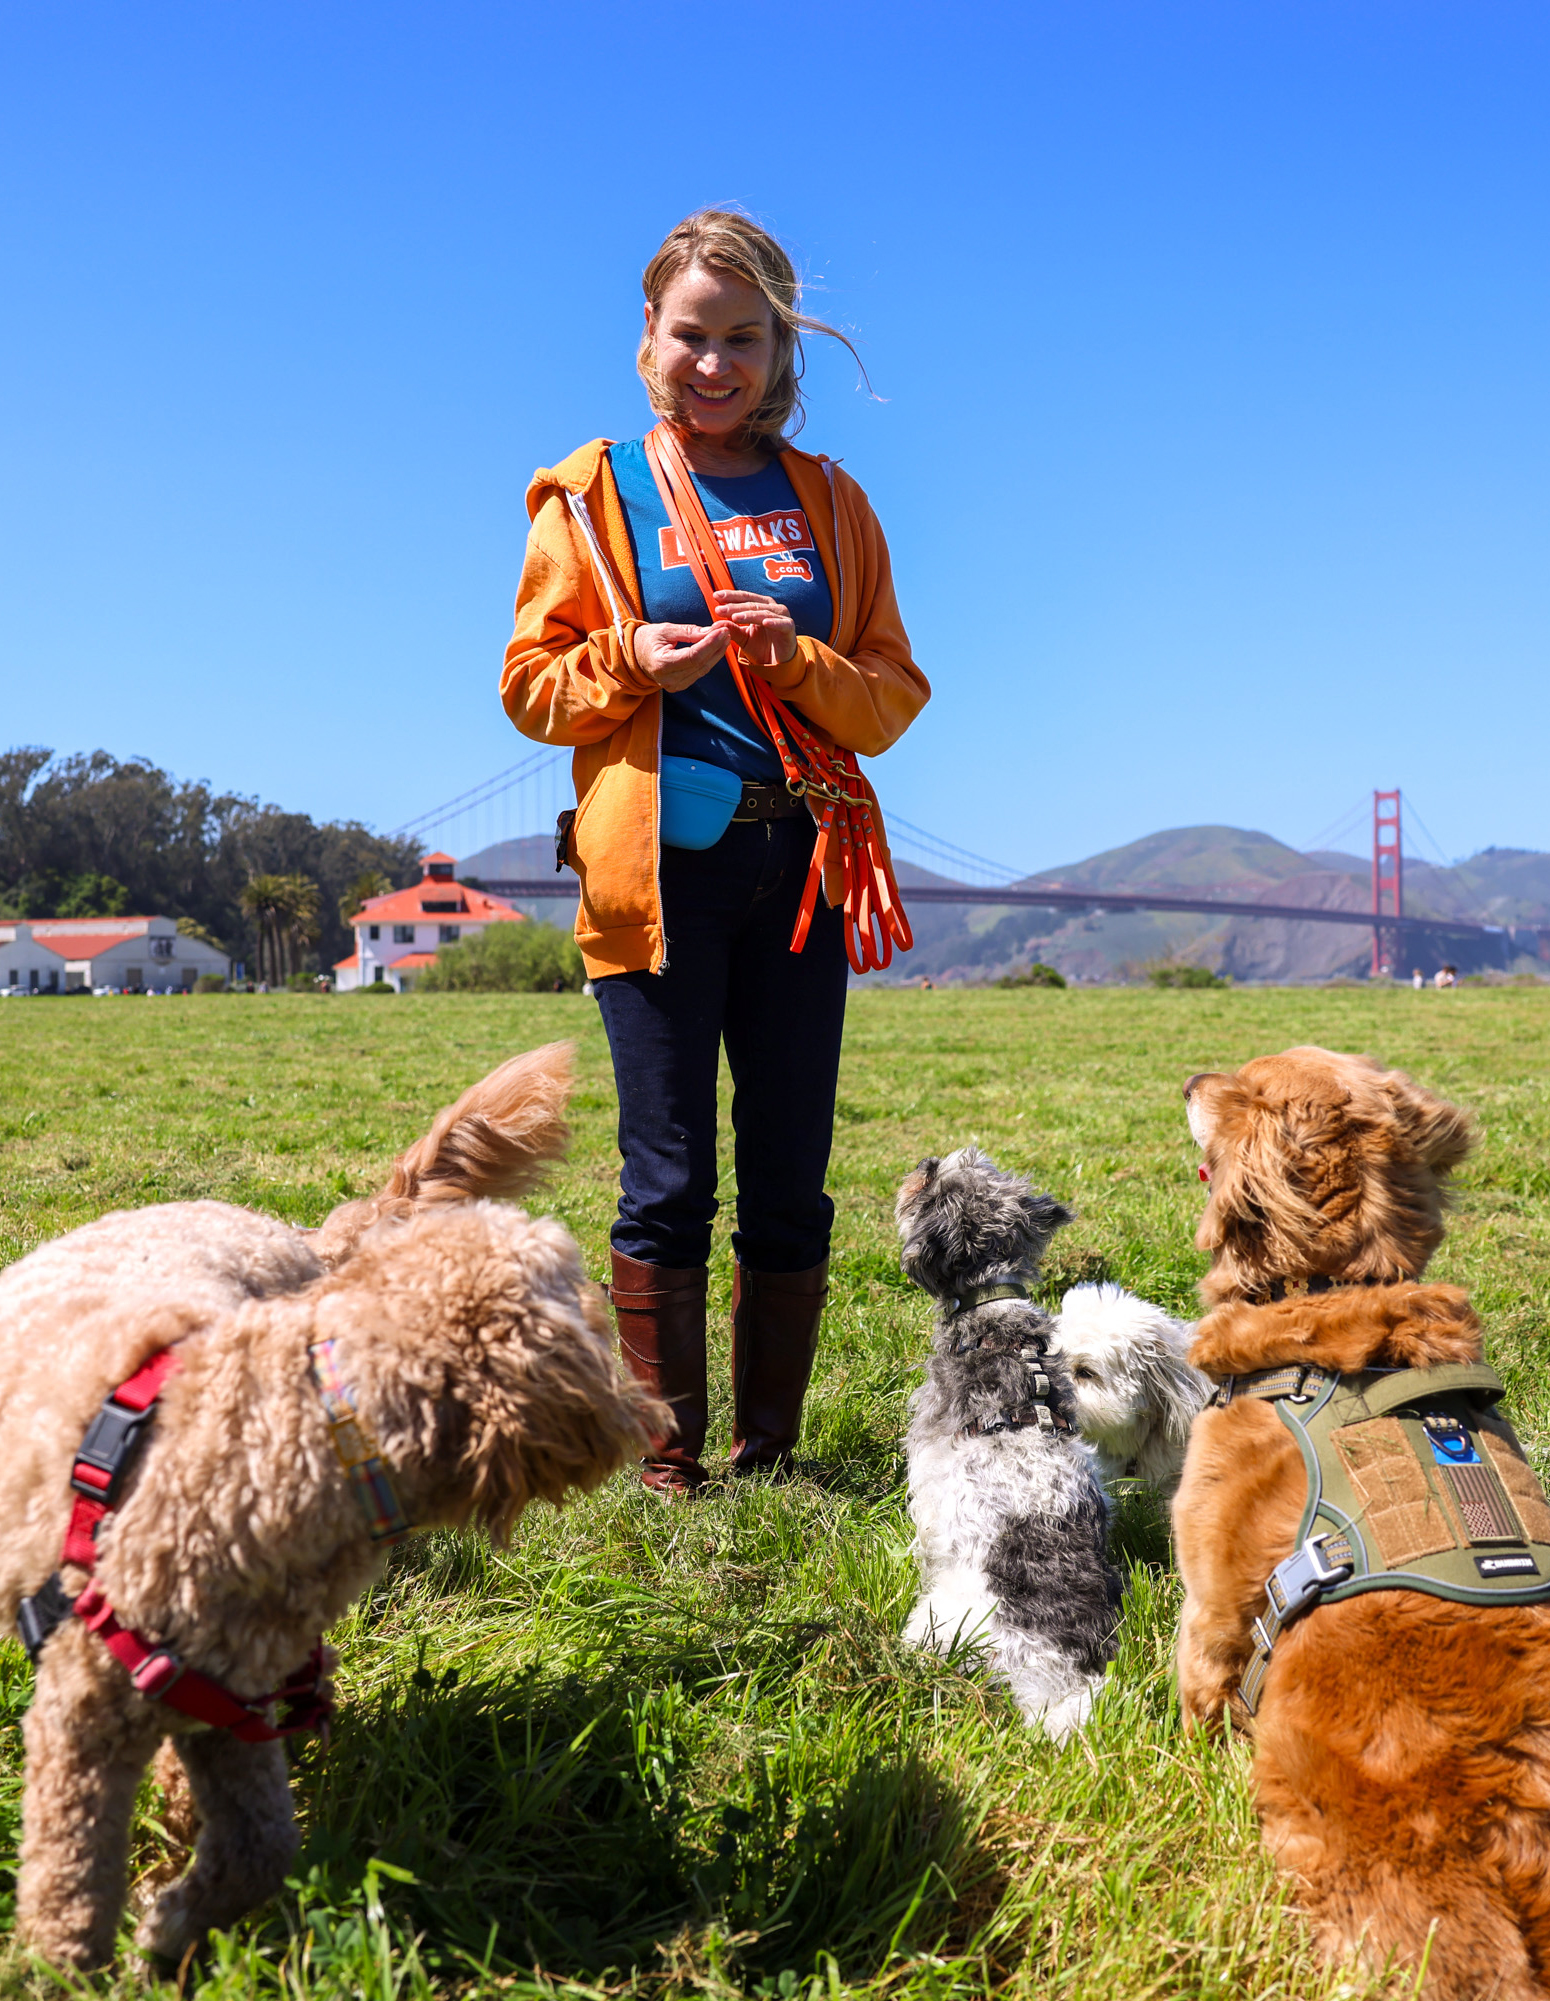 A woman with a bright smile stands in a grassy field with four playful dogs, the Golden Gate Bridge in the background.